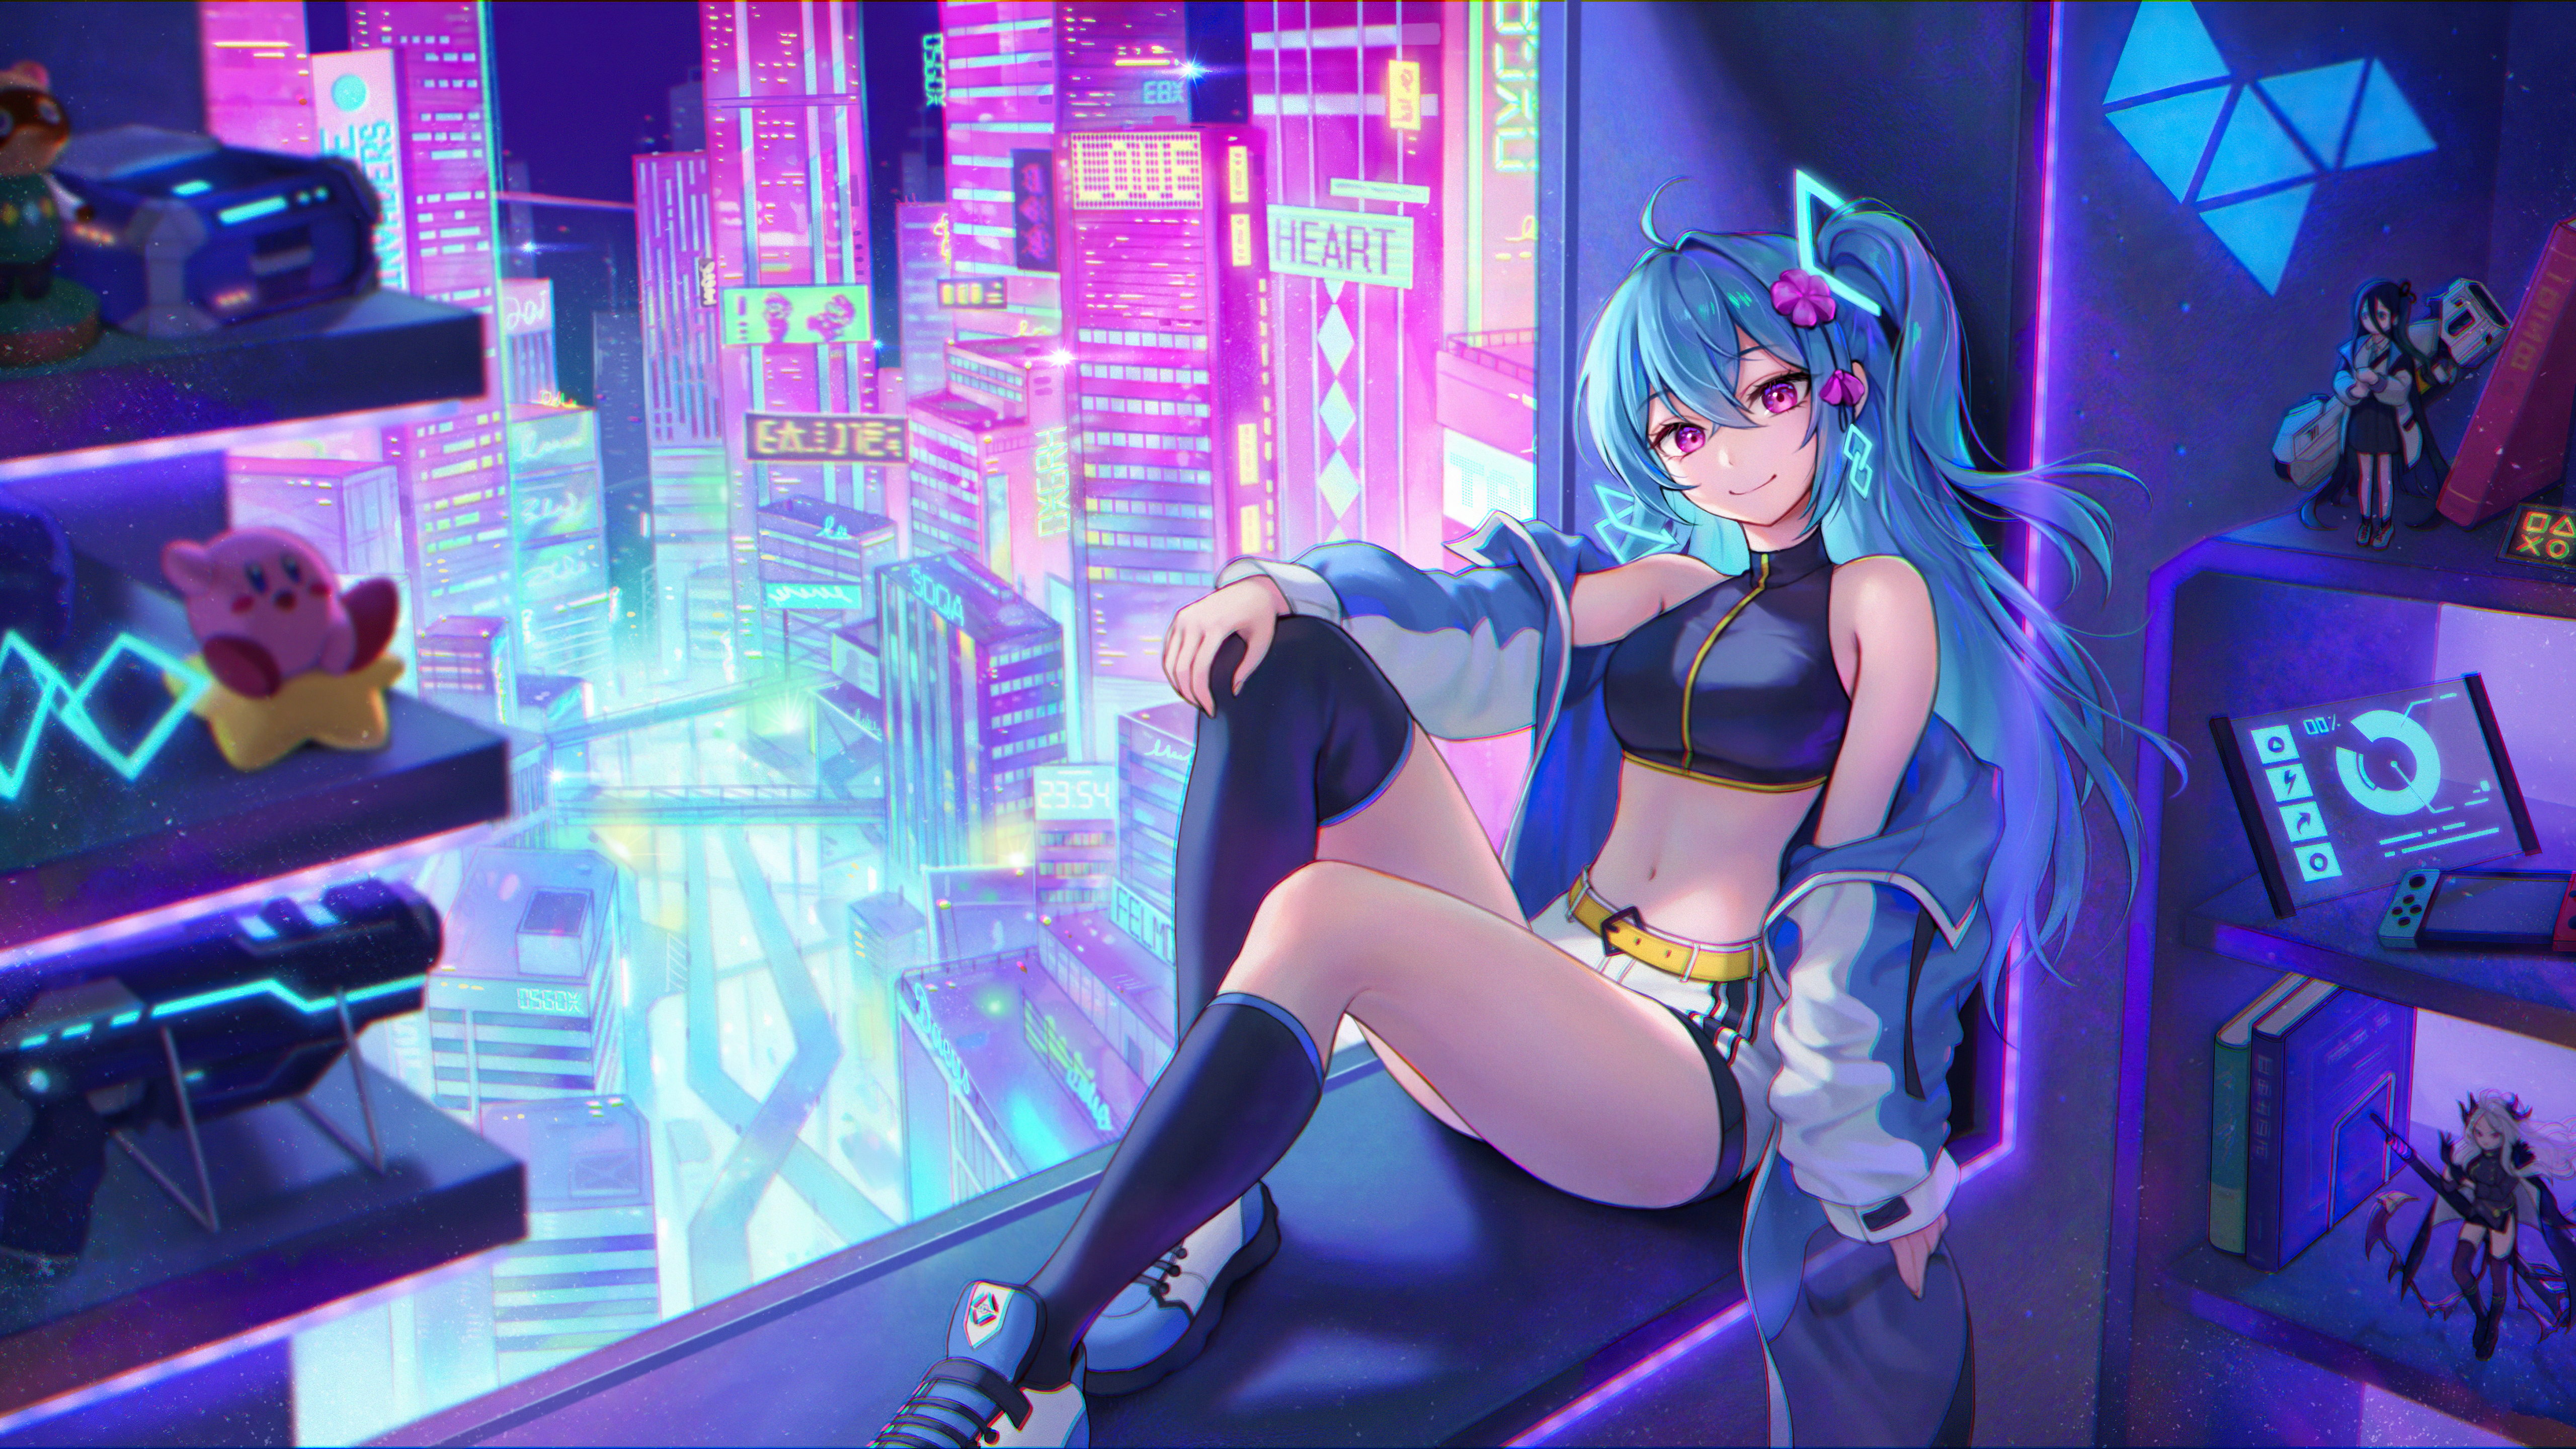 Anime 5120x2880 anime anime girls anaglyphic belly purple eyes city lights city Nintendo Switch figurines